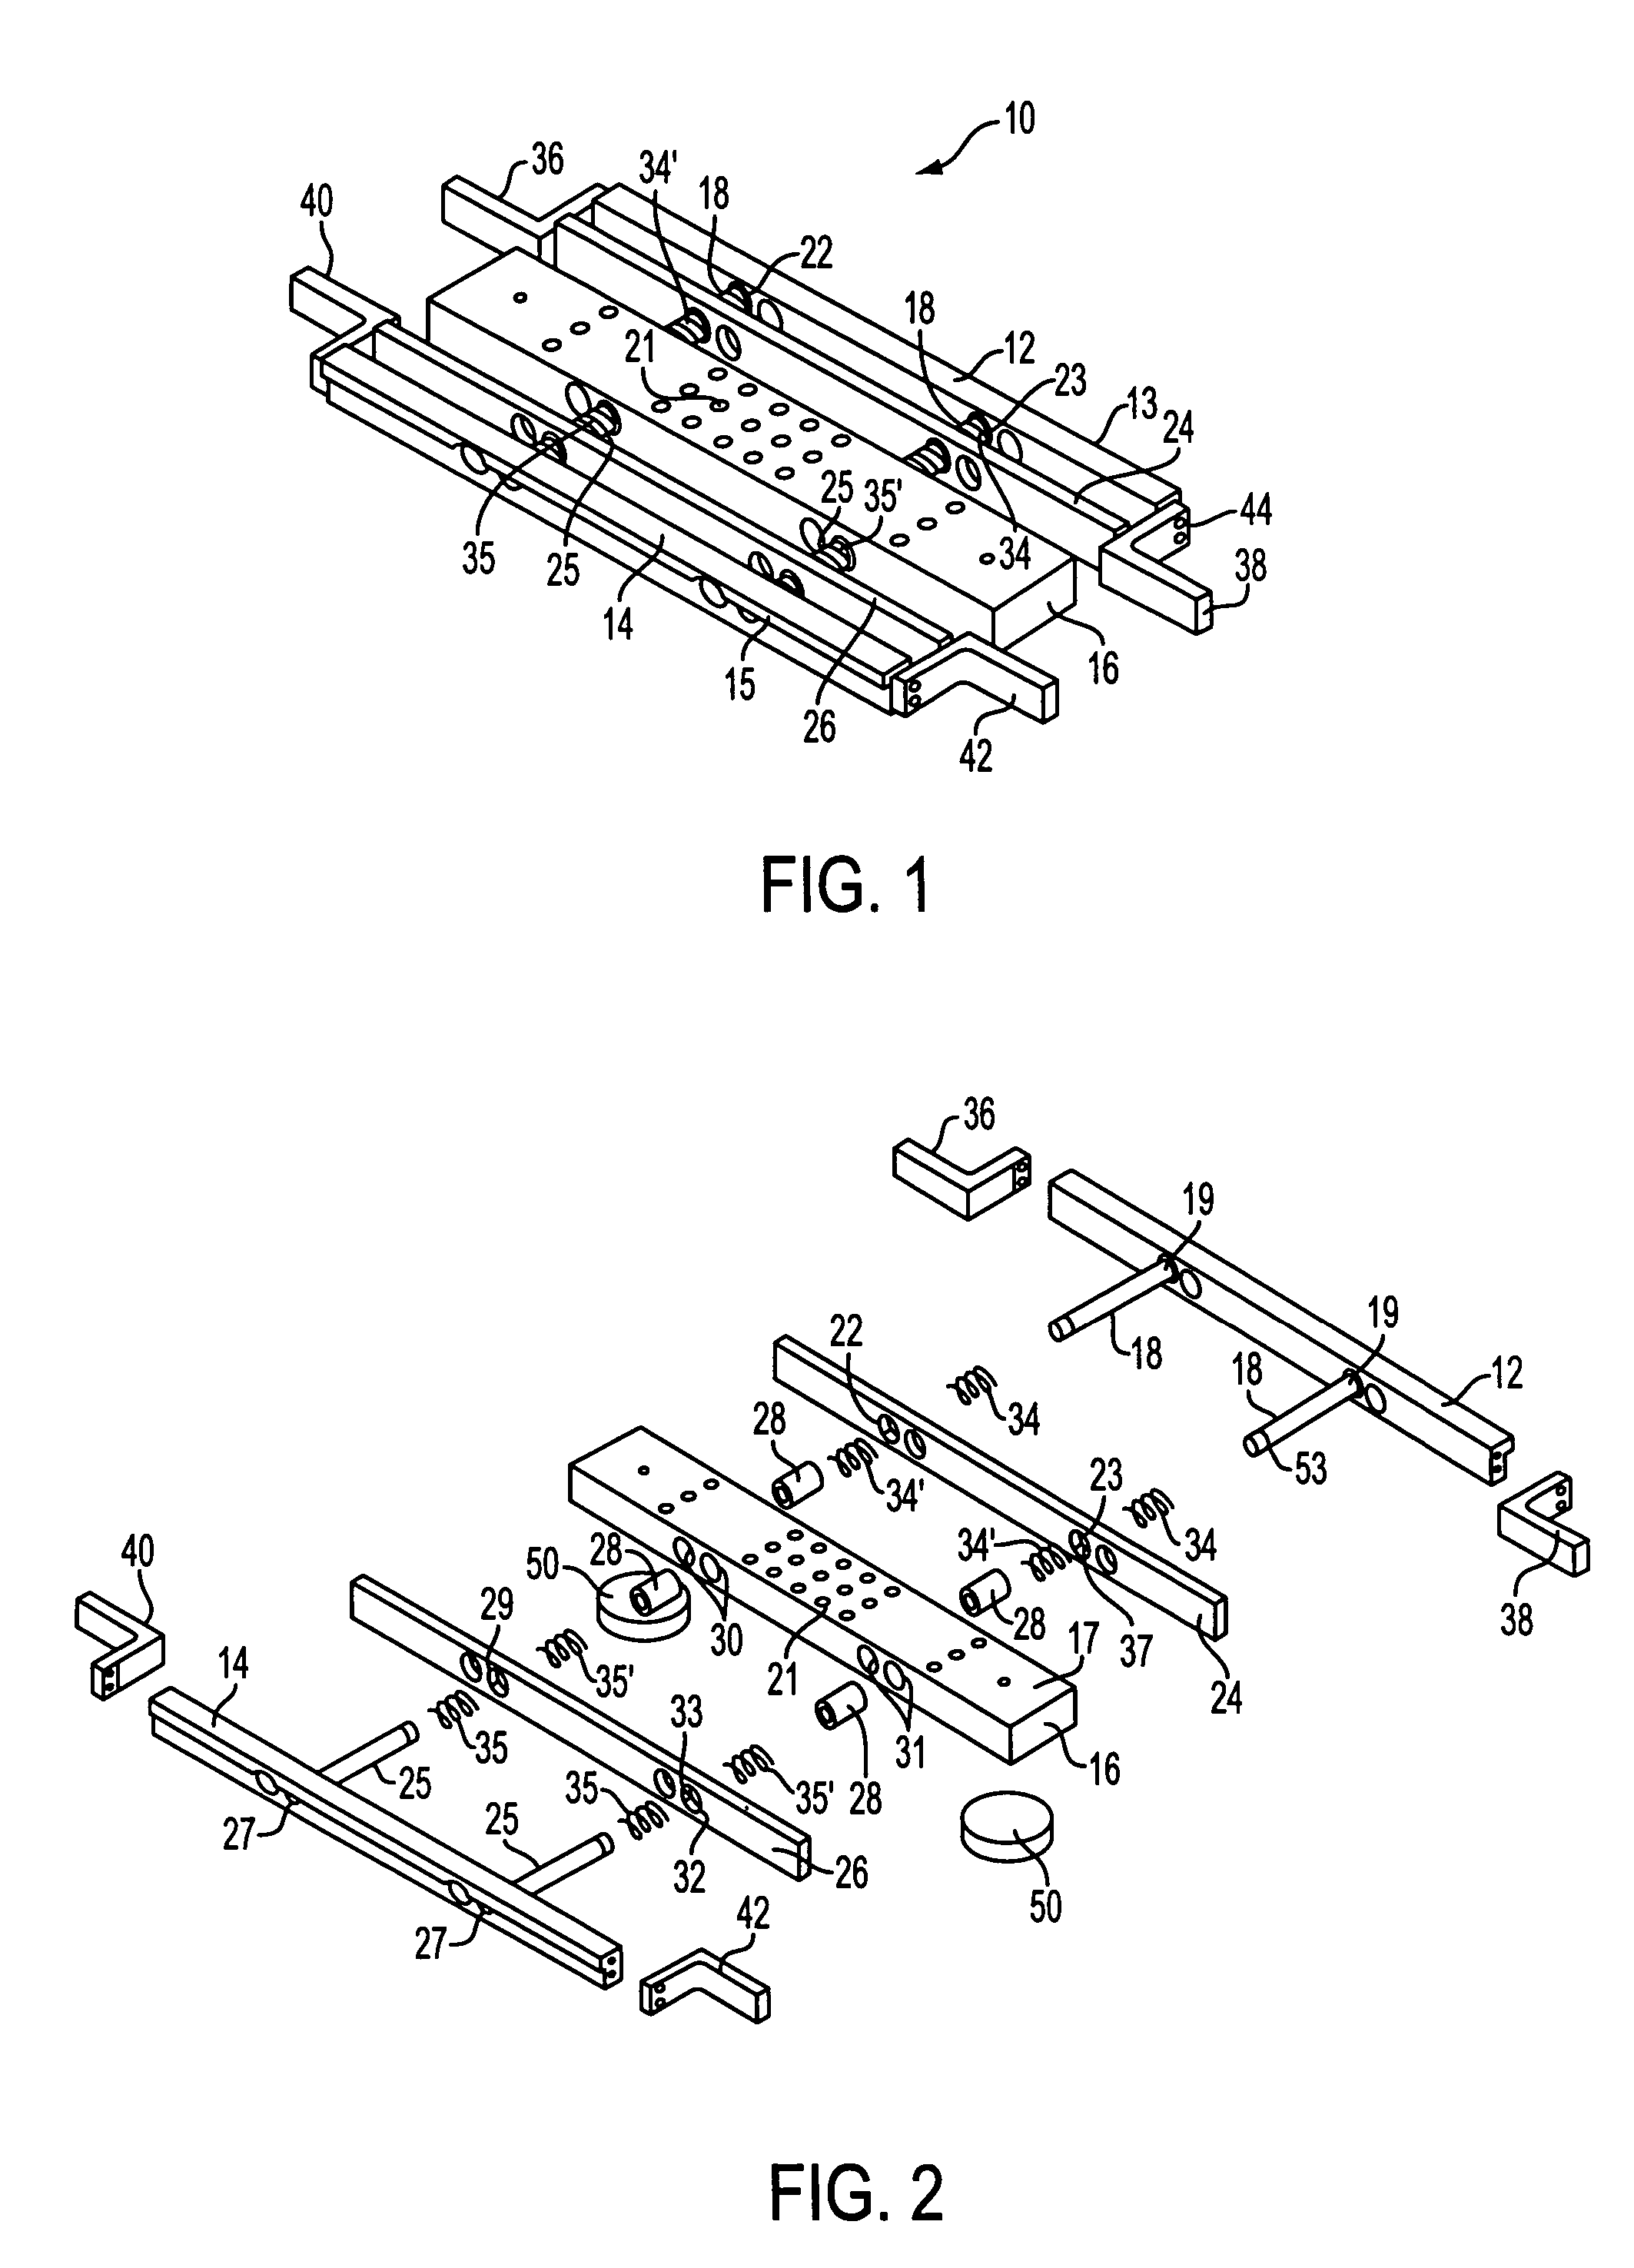 Method of using a self-adjusting printed circuit board support